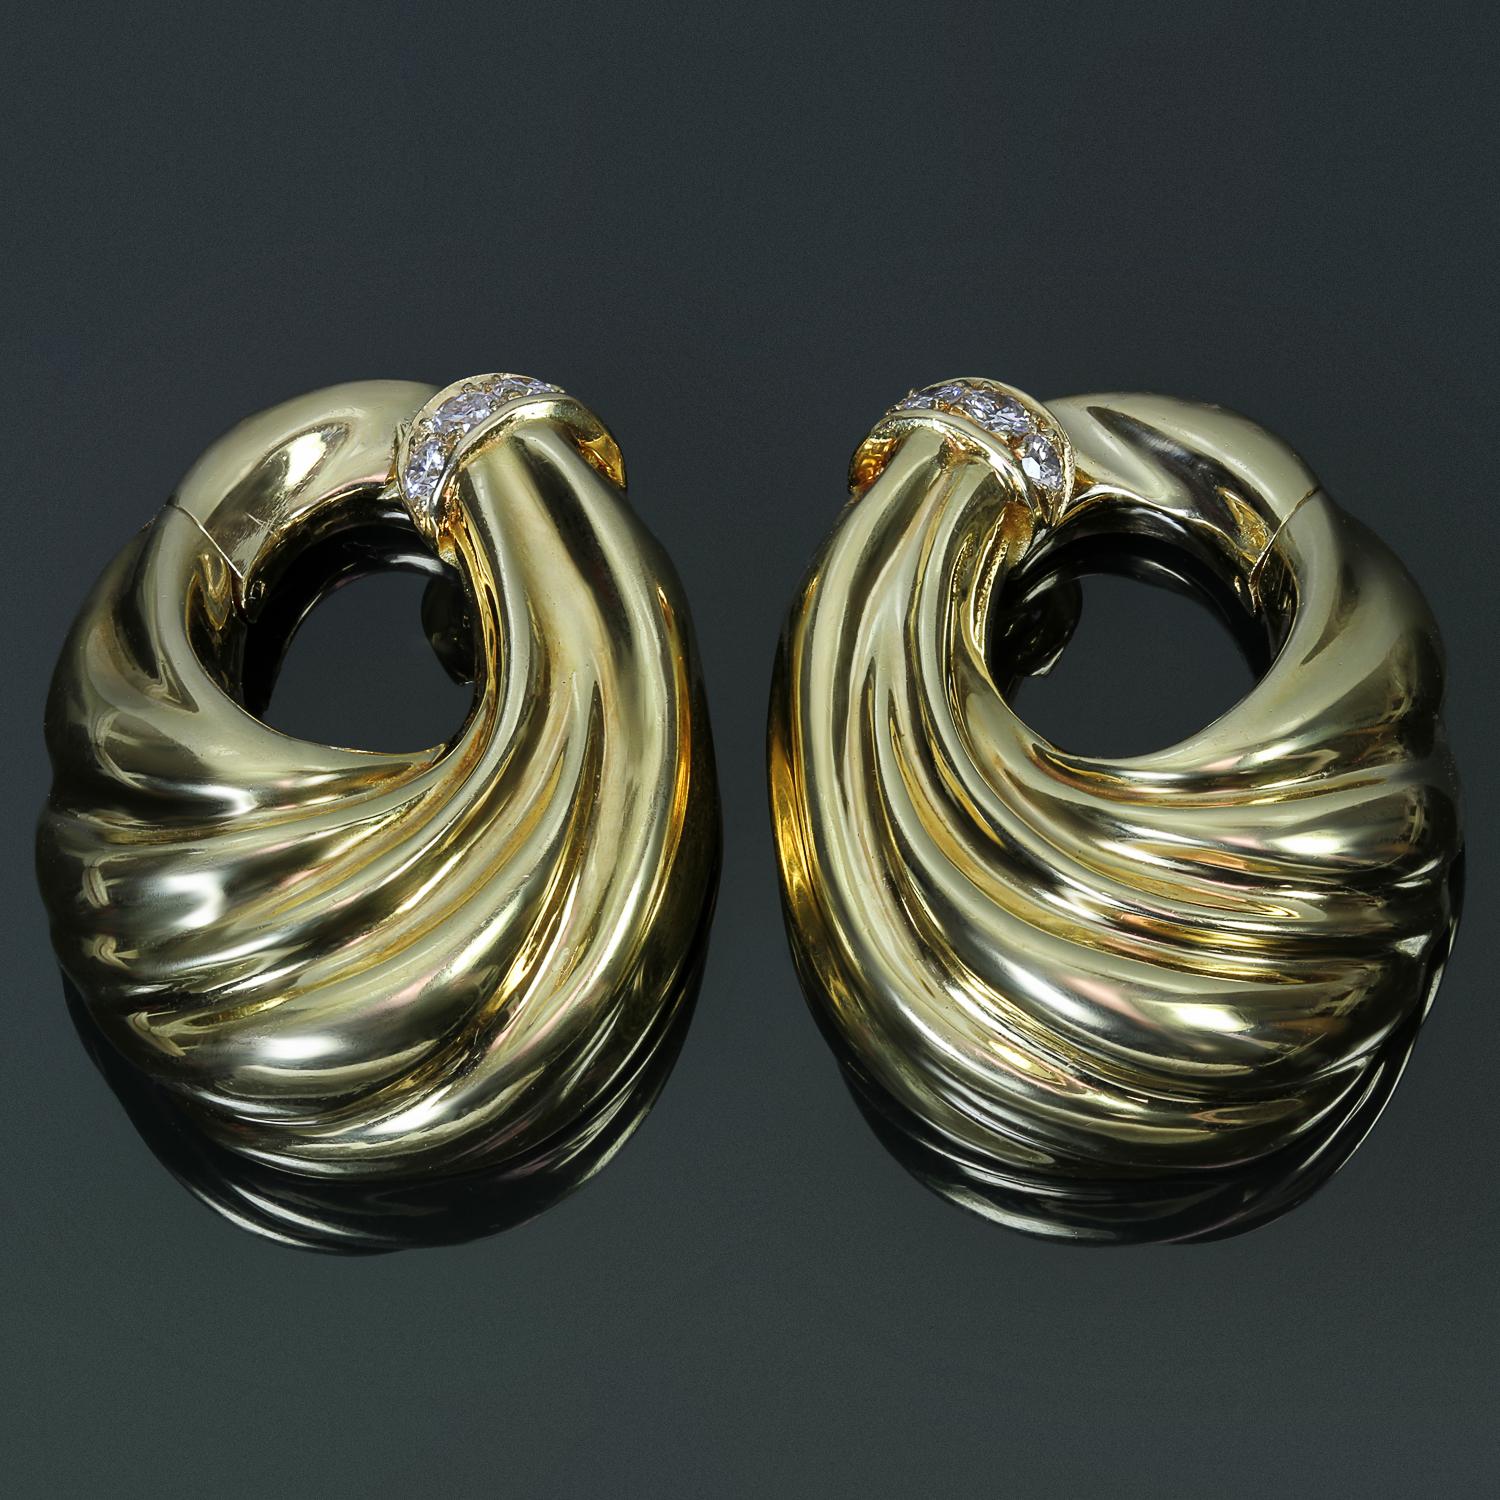 These fabulous vintage Van Cleef & Arpels earrings feature a swirling hoop clip-on design crafted in 18k yellow gold and set with brilliant-cut round D-E-F VVS1-VVS2 diamonds weighing an estimated 0.40 carats. Made in France circa 1970s.